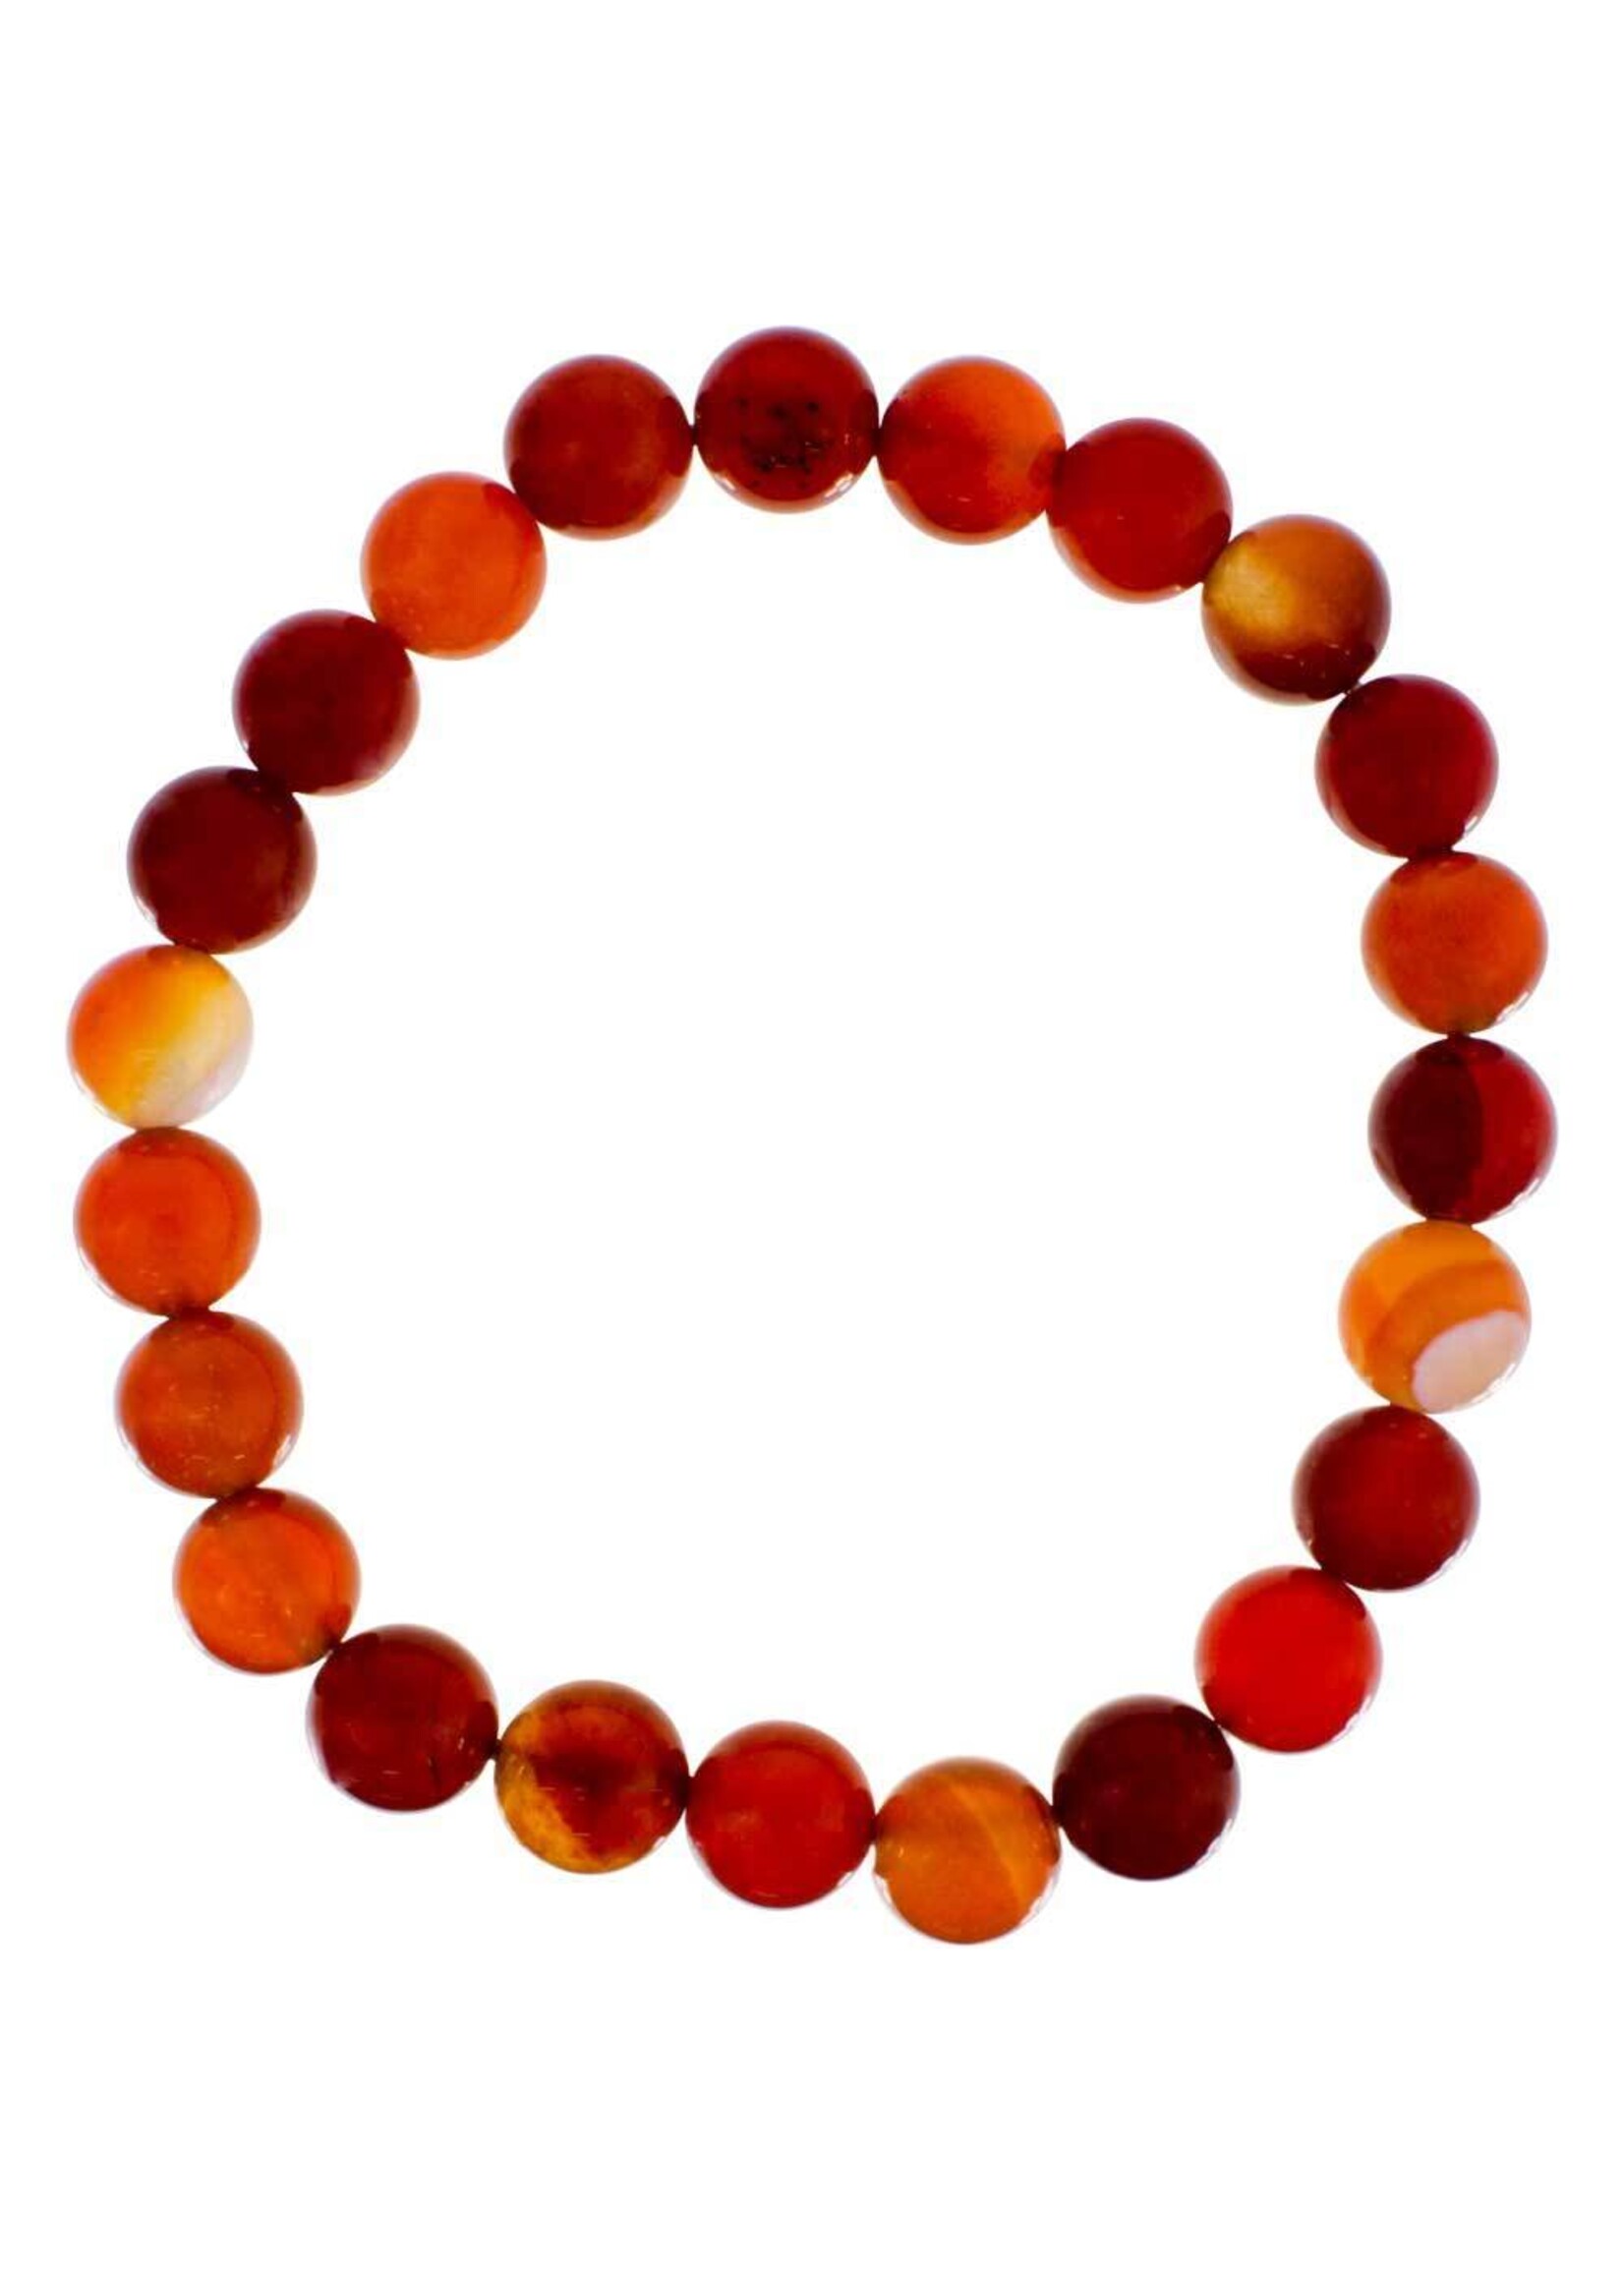 8 mm Elastic Stone Bracelet - Brown and Red Agate